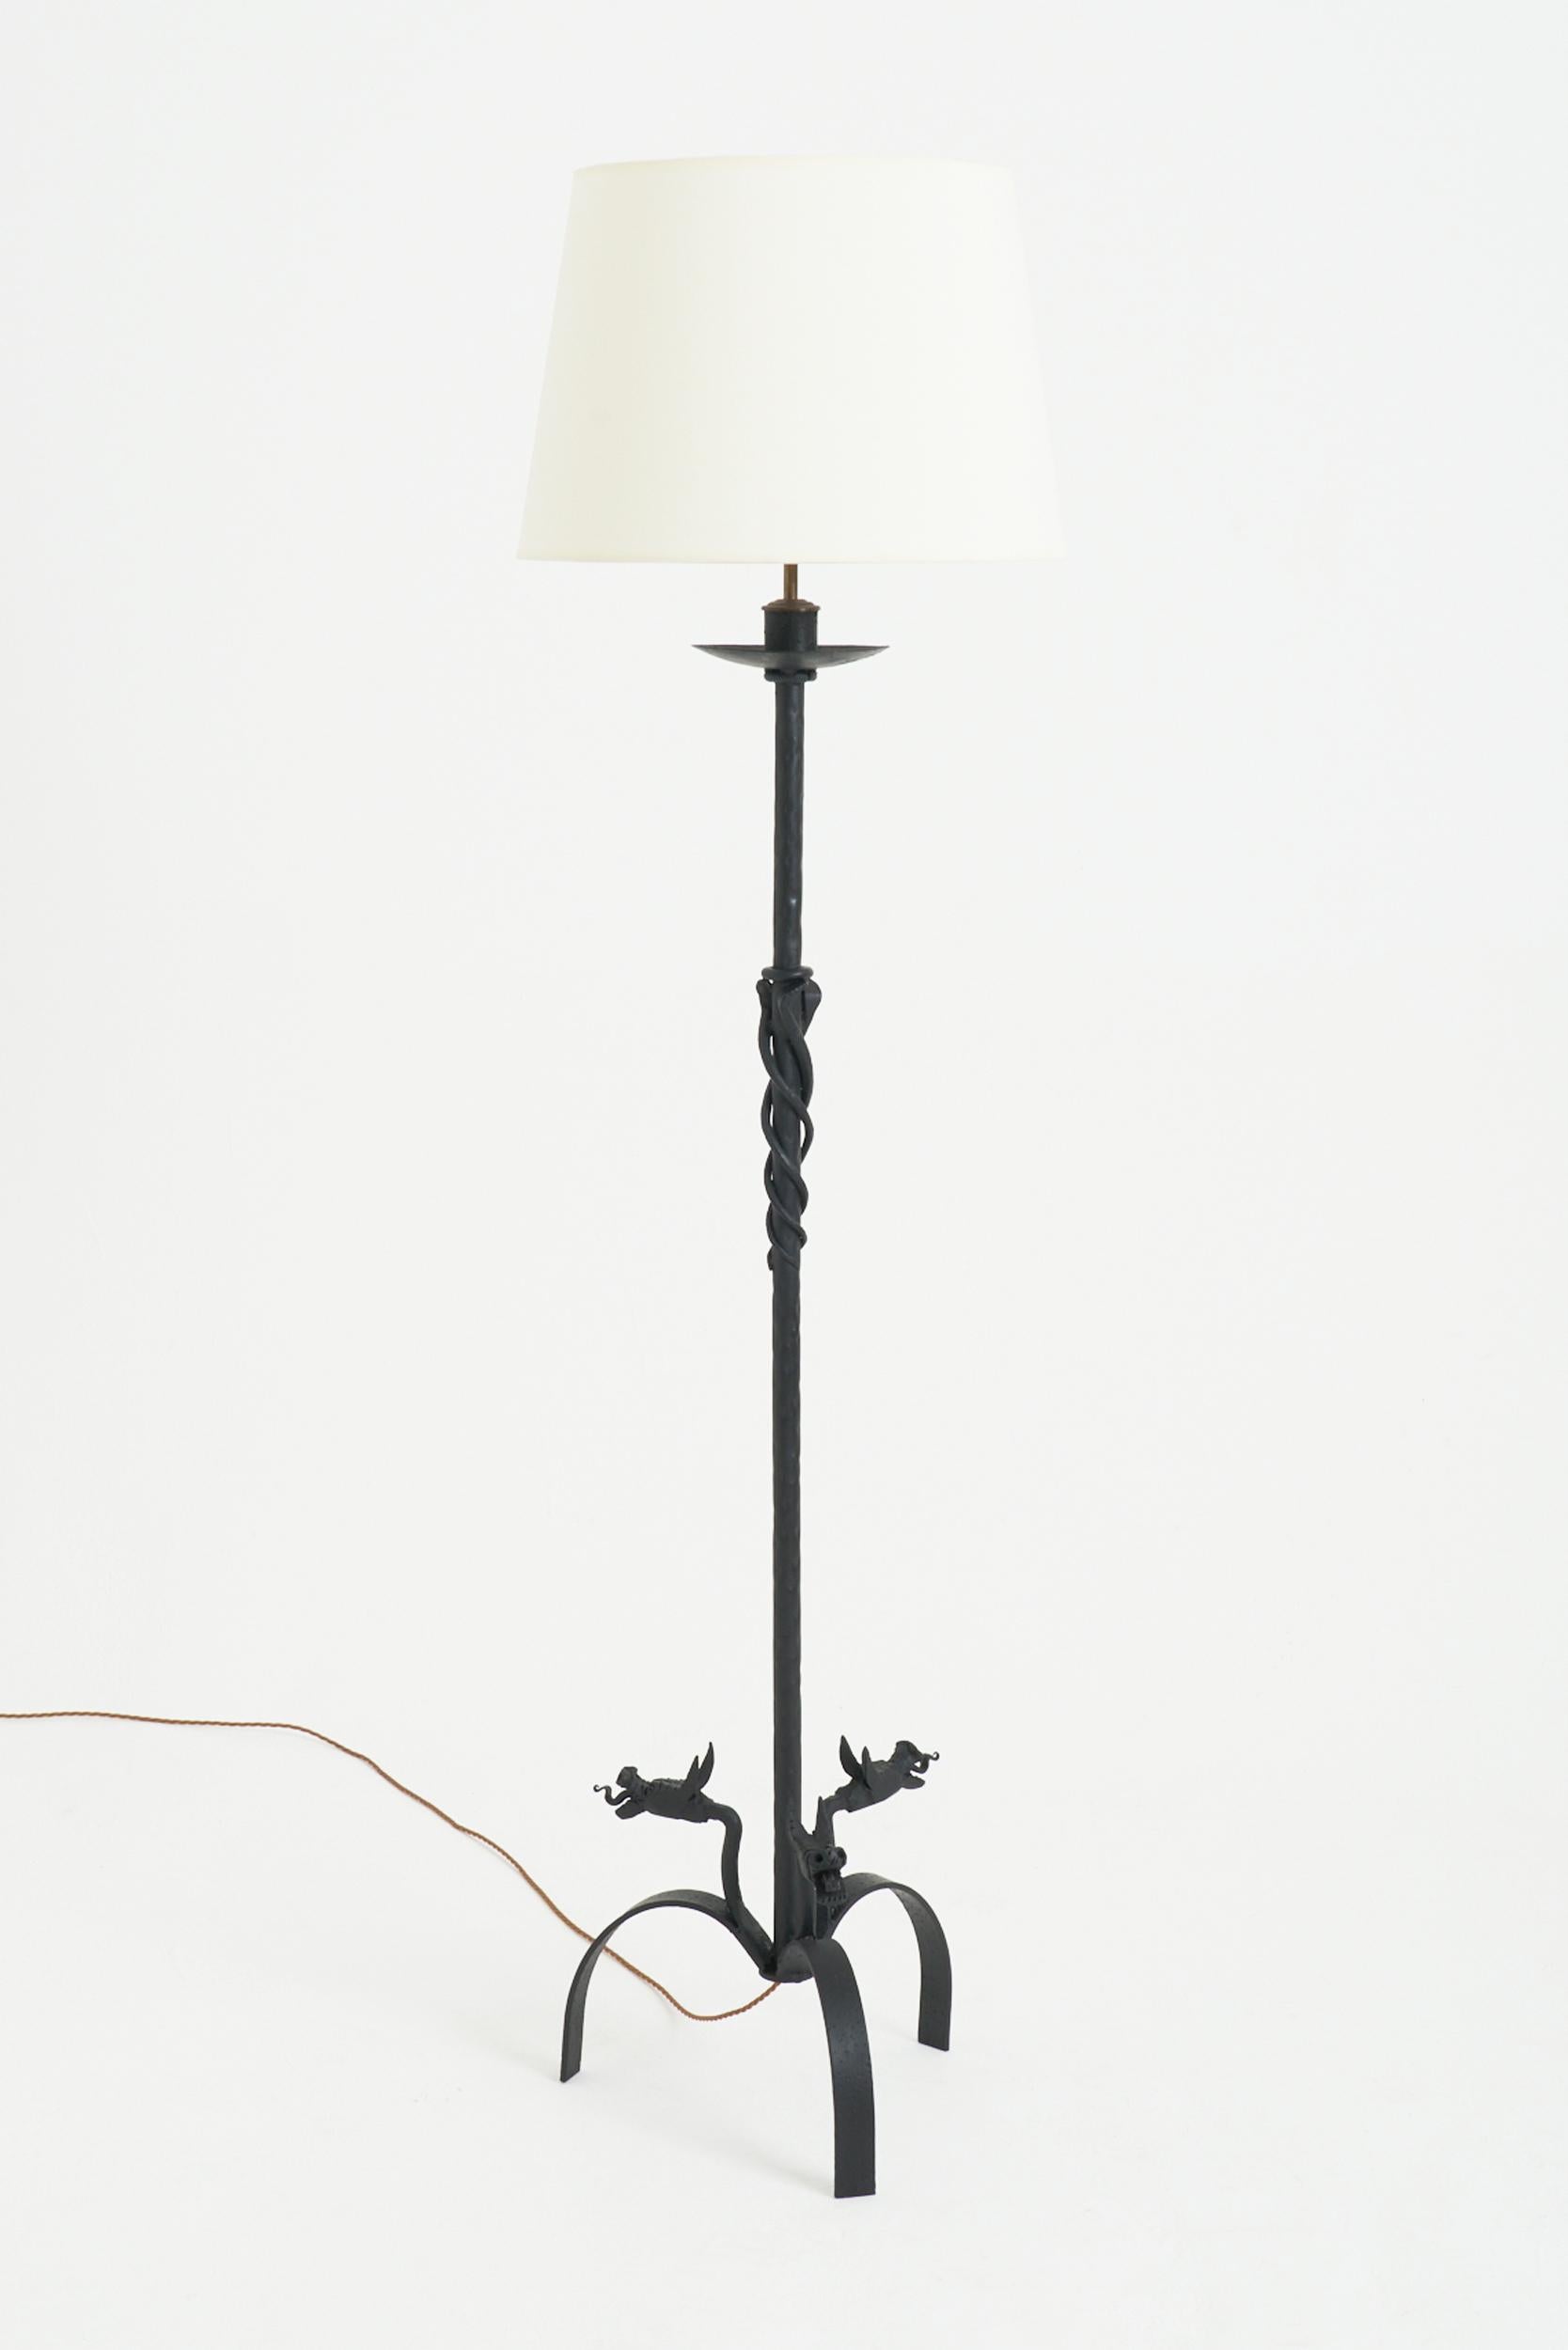 A black patinated wrought iron floor lamp, with dragons heads on the tripod base, and snakes on the stem.
Spain, mid 20th Century
With the shade: 170 cm high by 46 cm diameter
Lamp base only: 144 cm high by 38 cm diameter